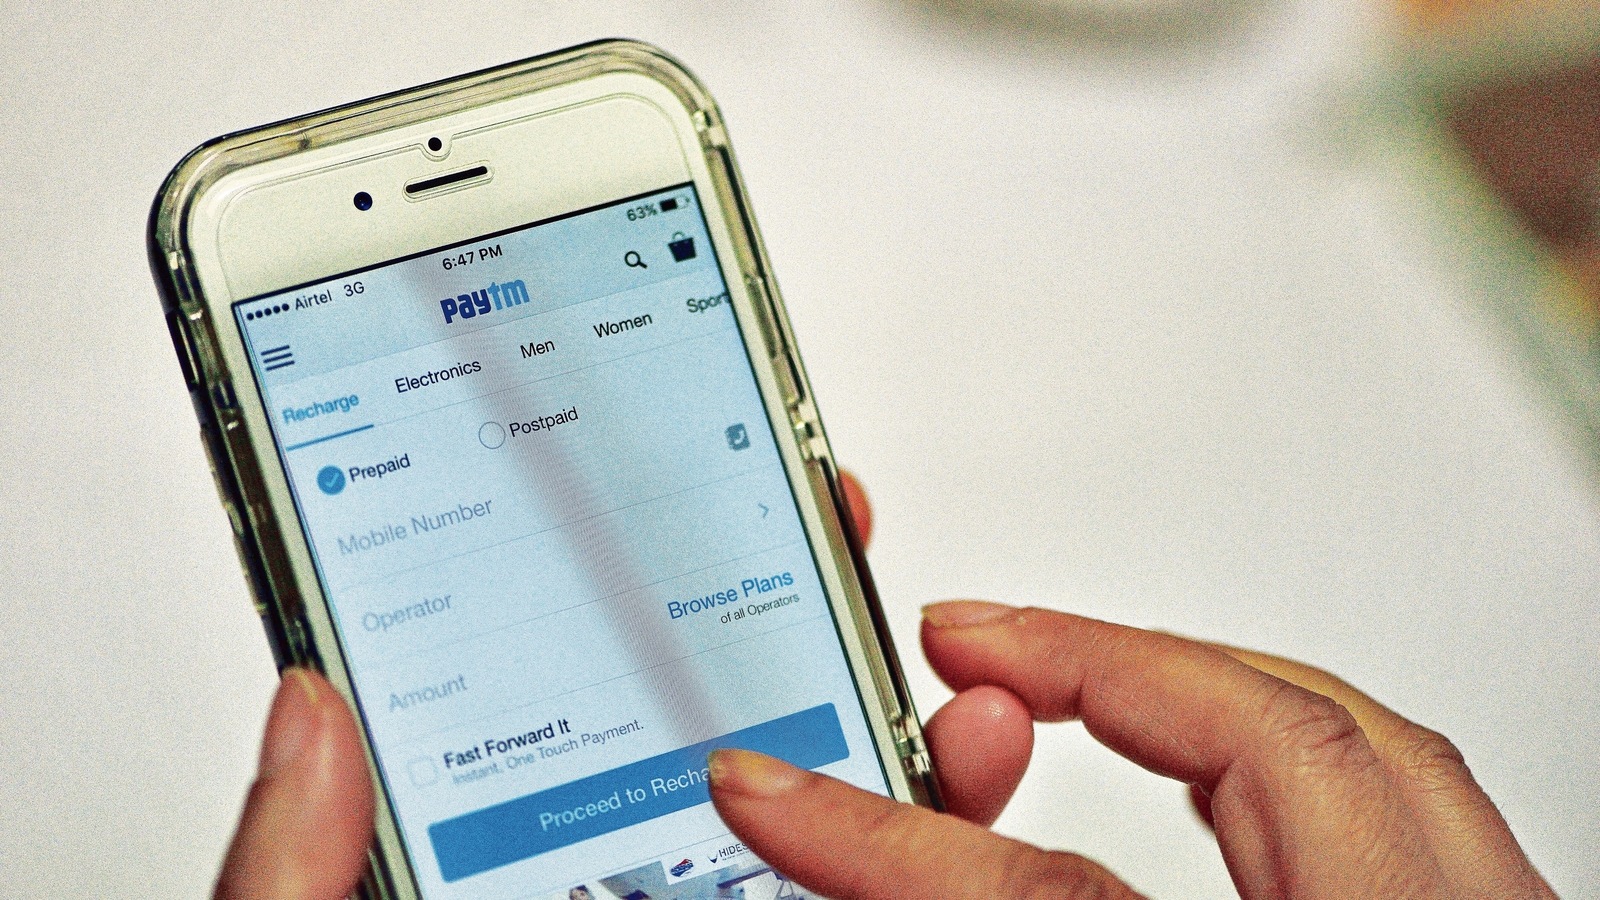 Paytm targets $3 billion IPO, would be India’s largest debut | Tech News